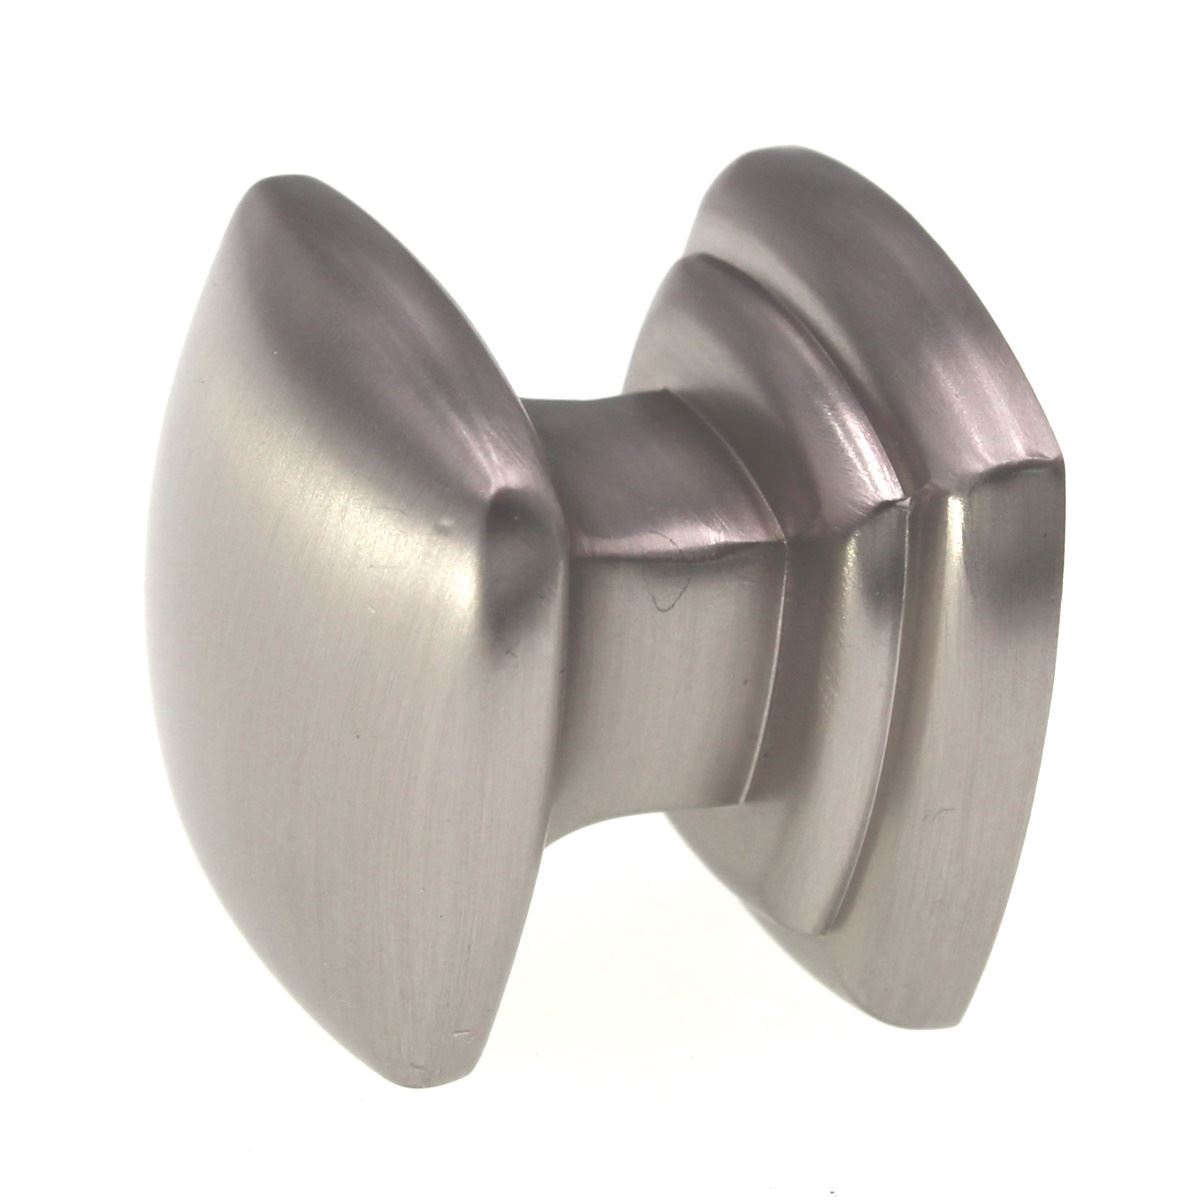 Hickory Hardware Euro-Contemporary 1 1/4" Square Knob Stainless Steel P3181-SS